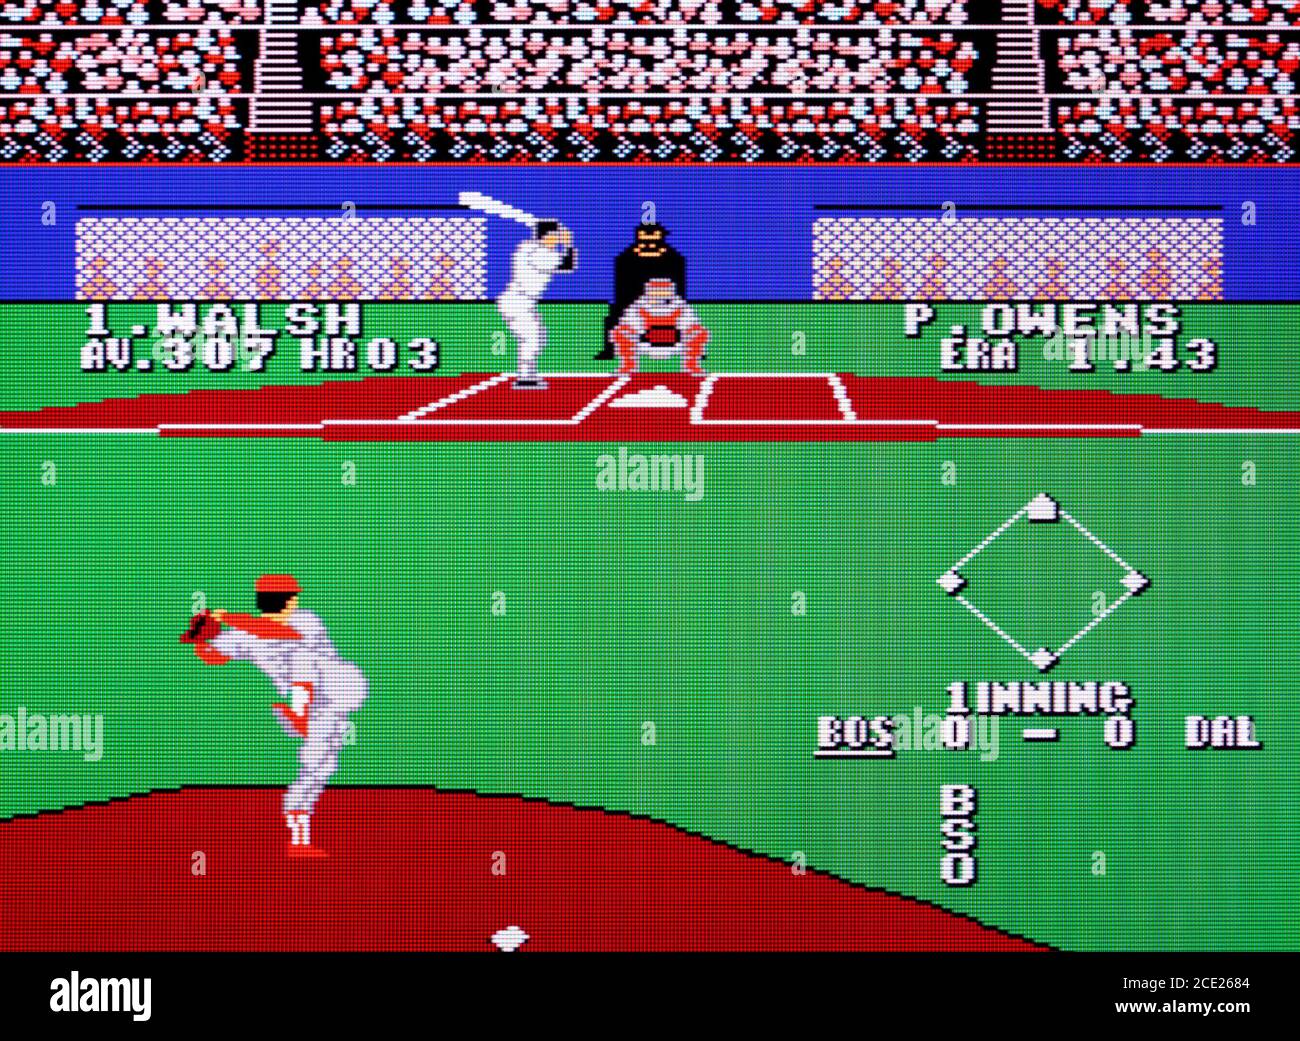 Bases Loaded 3 - Nintendo Entertainment System - NES Videogame - Editorial  use only Stock Photo - Alamy